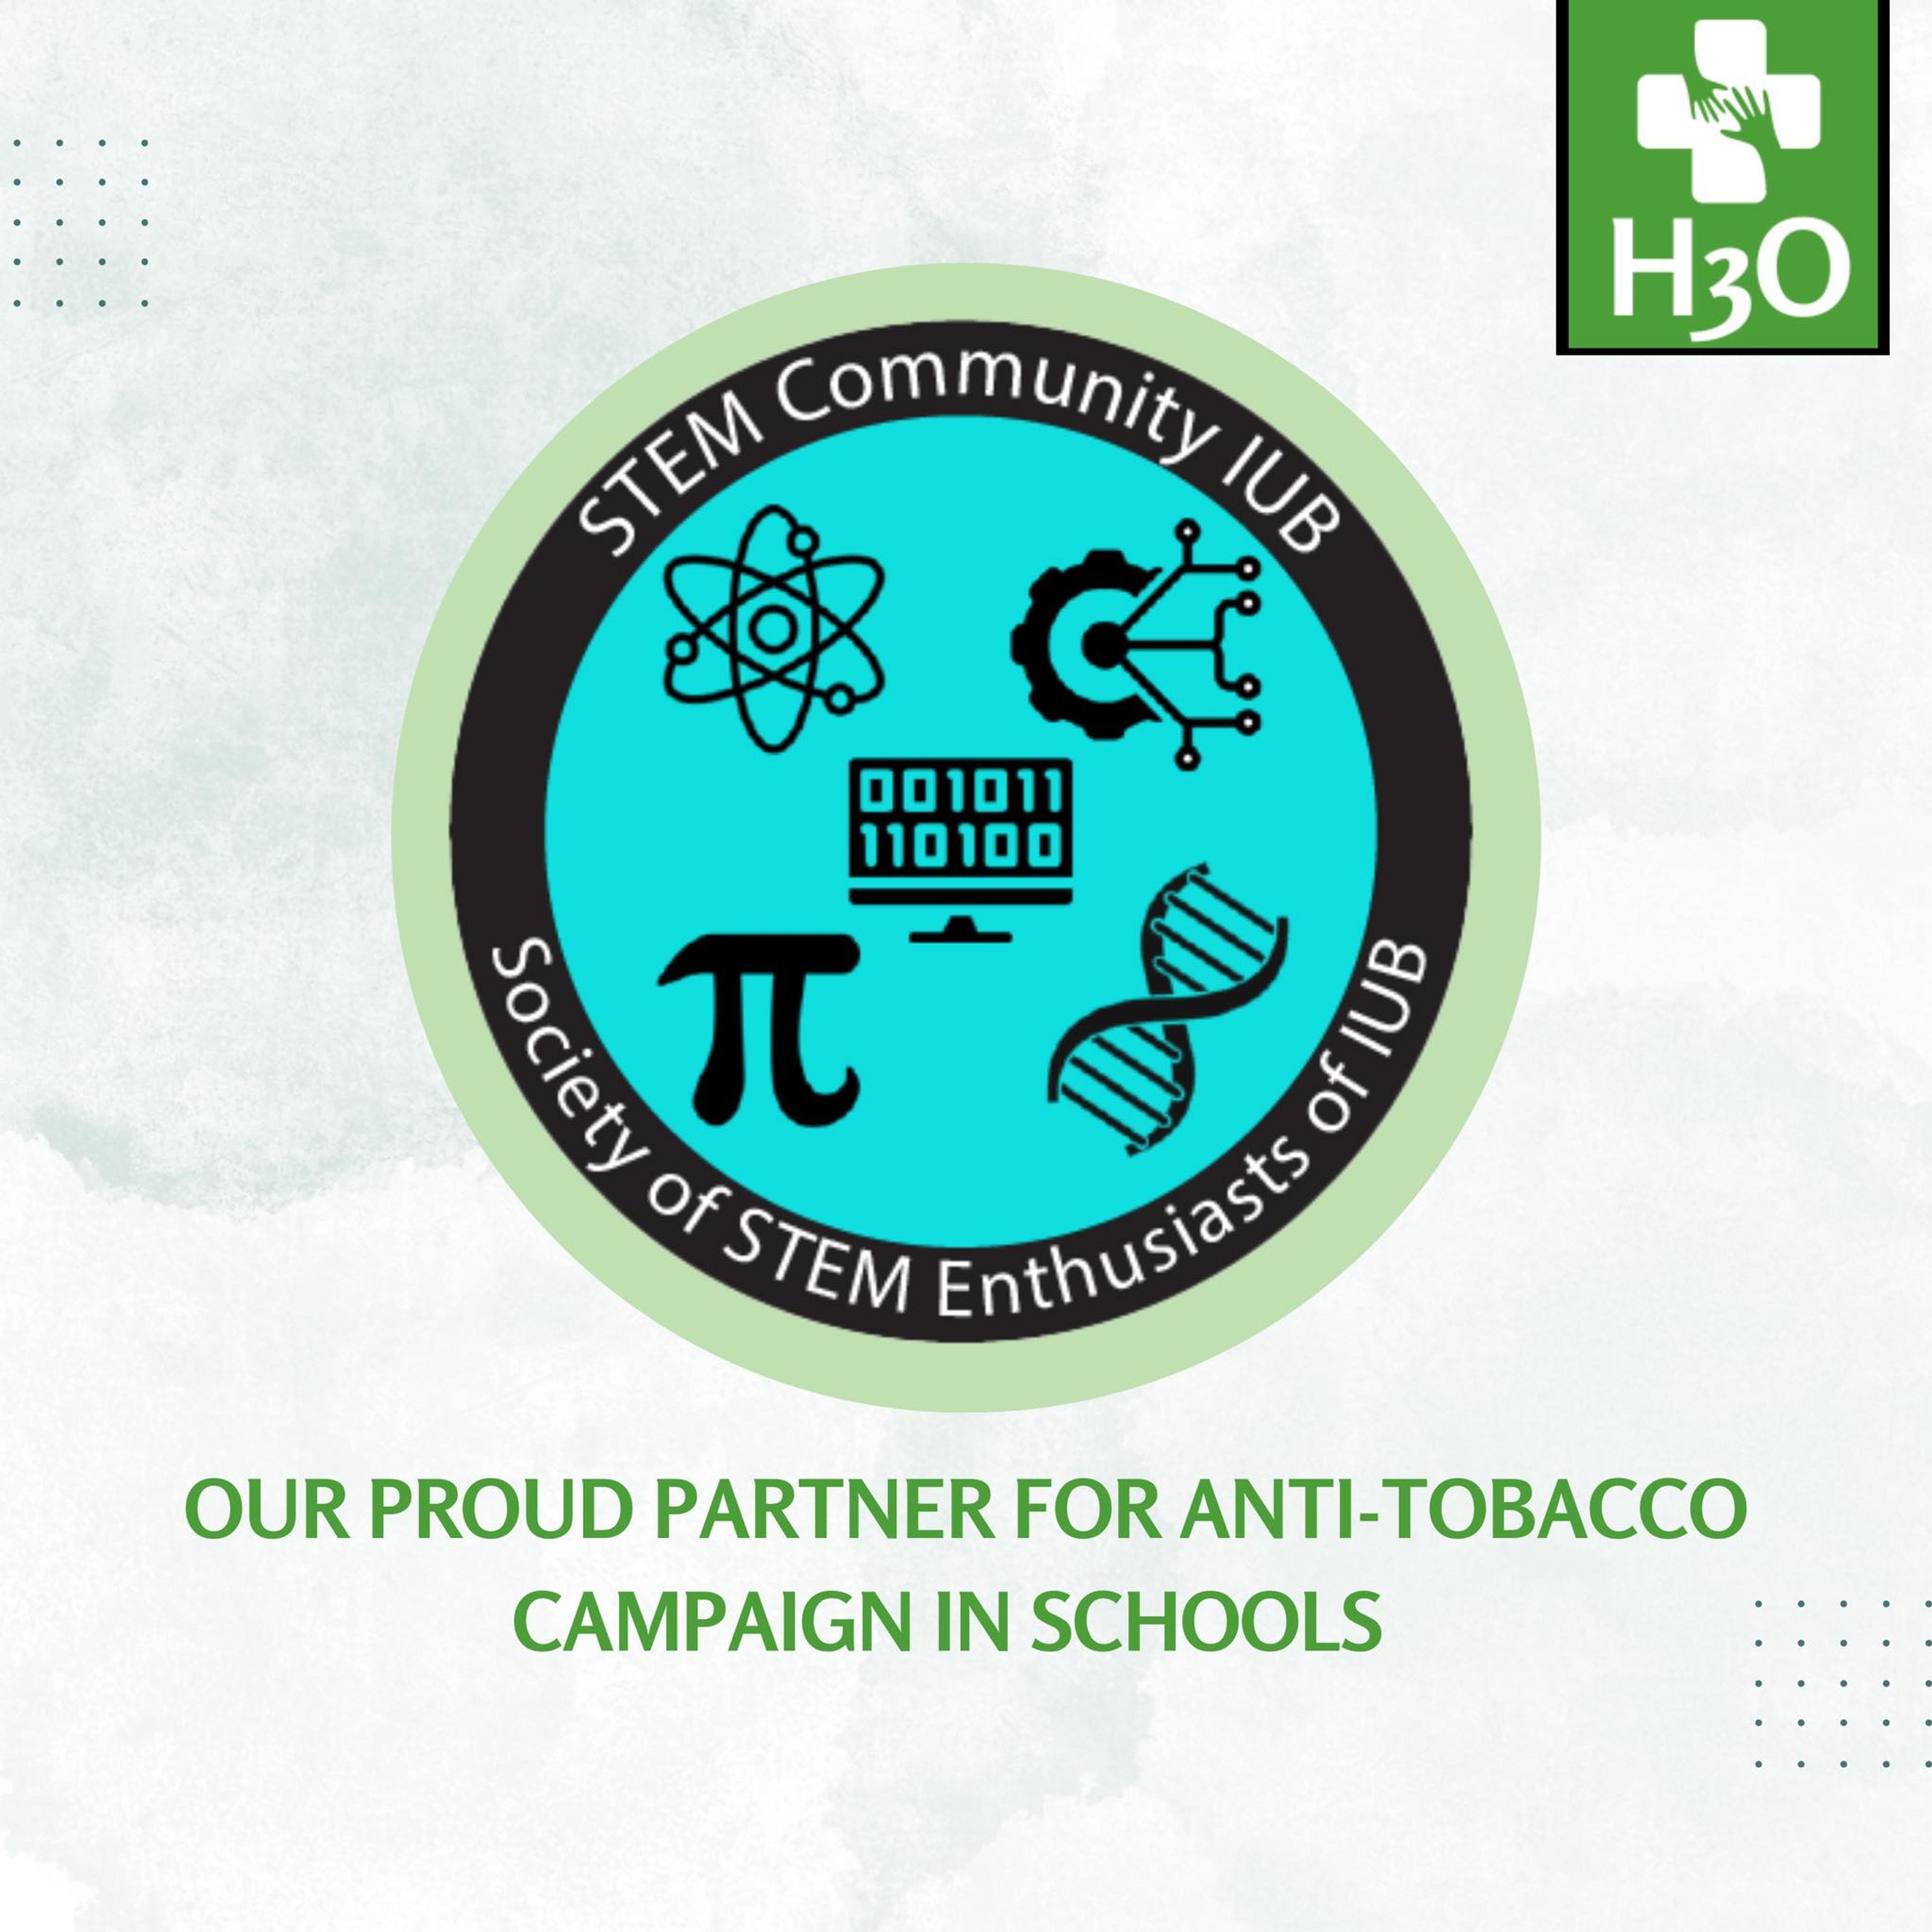 H3O Partners with STEMcIUB for Anti Tobacco Campaign